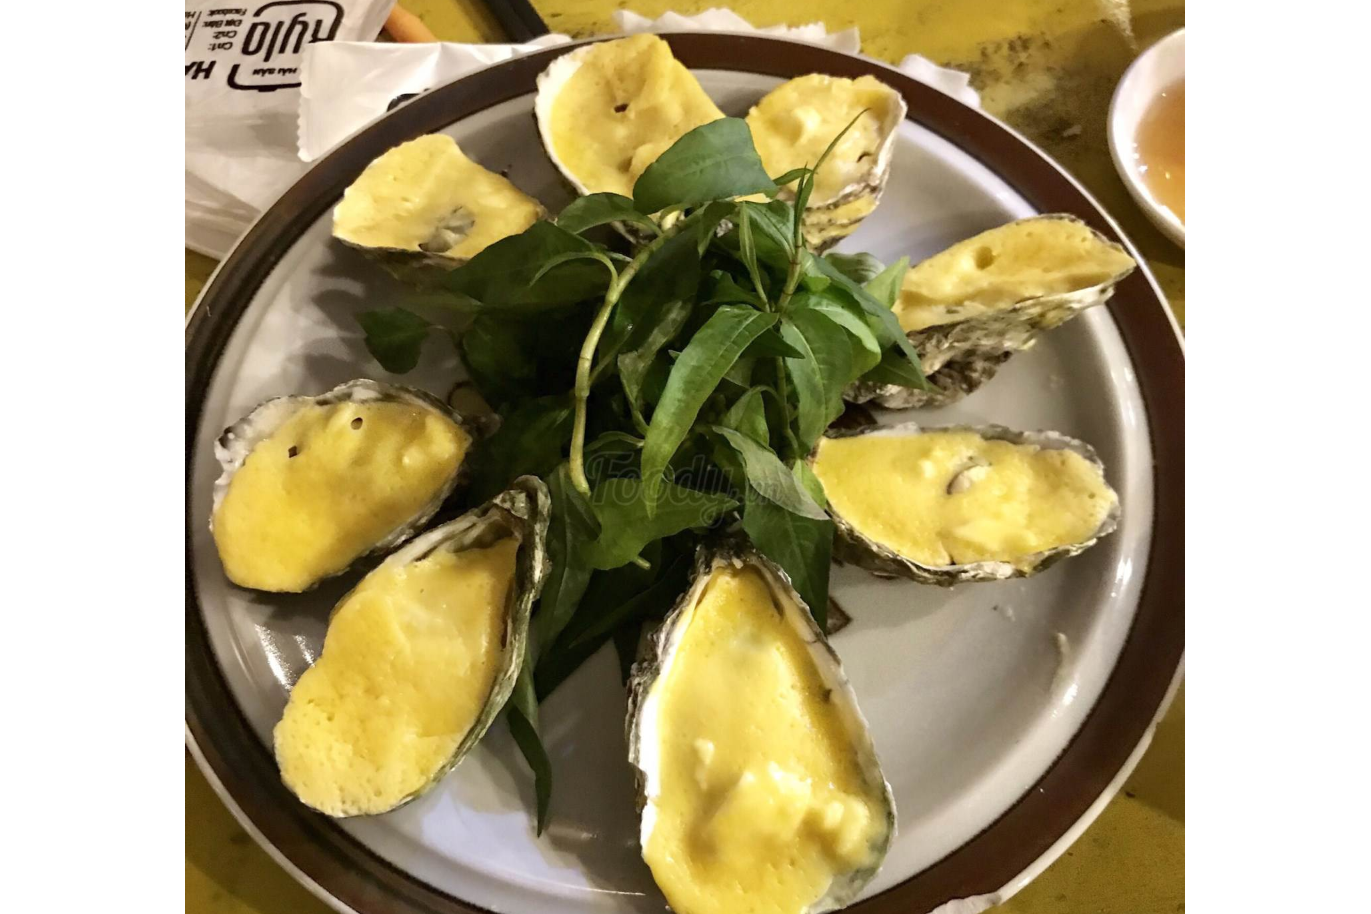  Grilled oysters with cheese